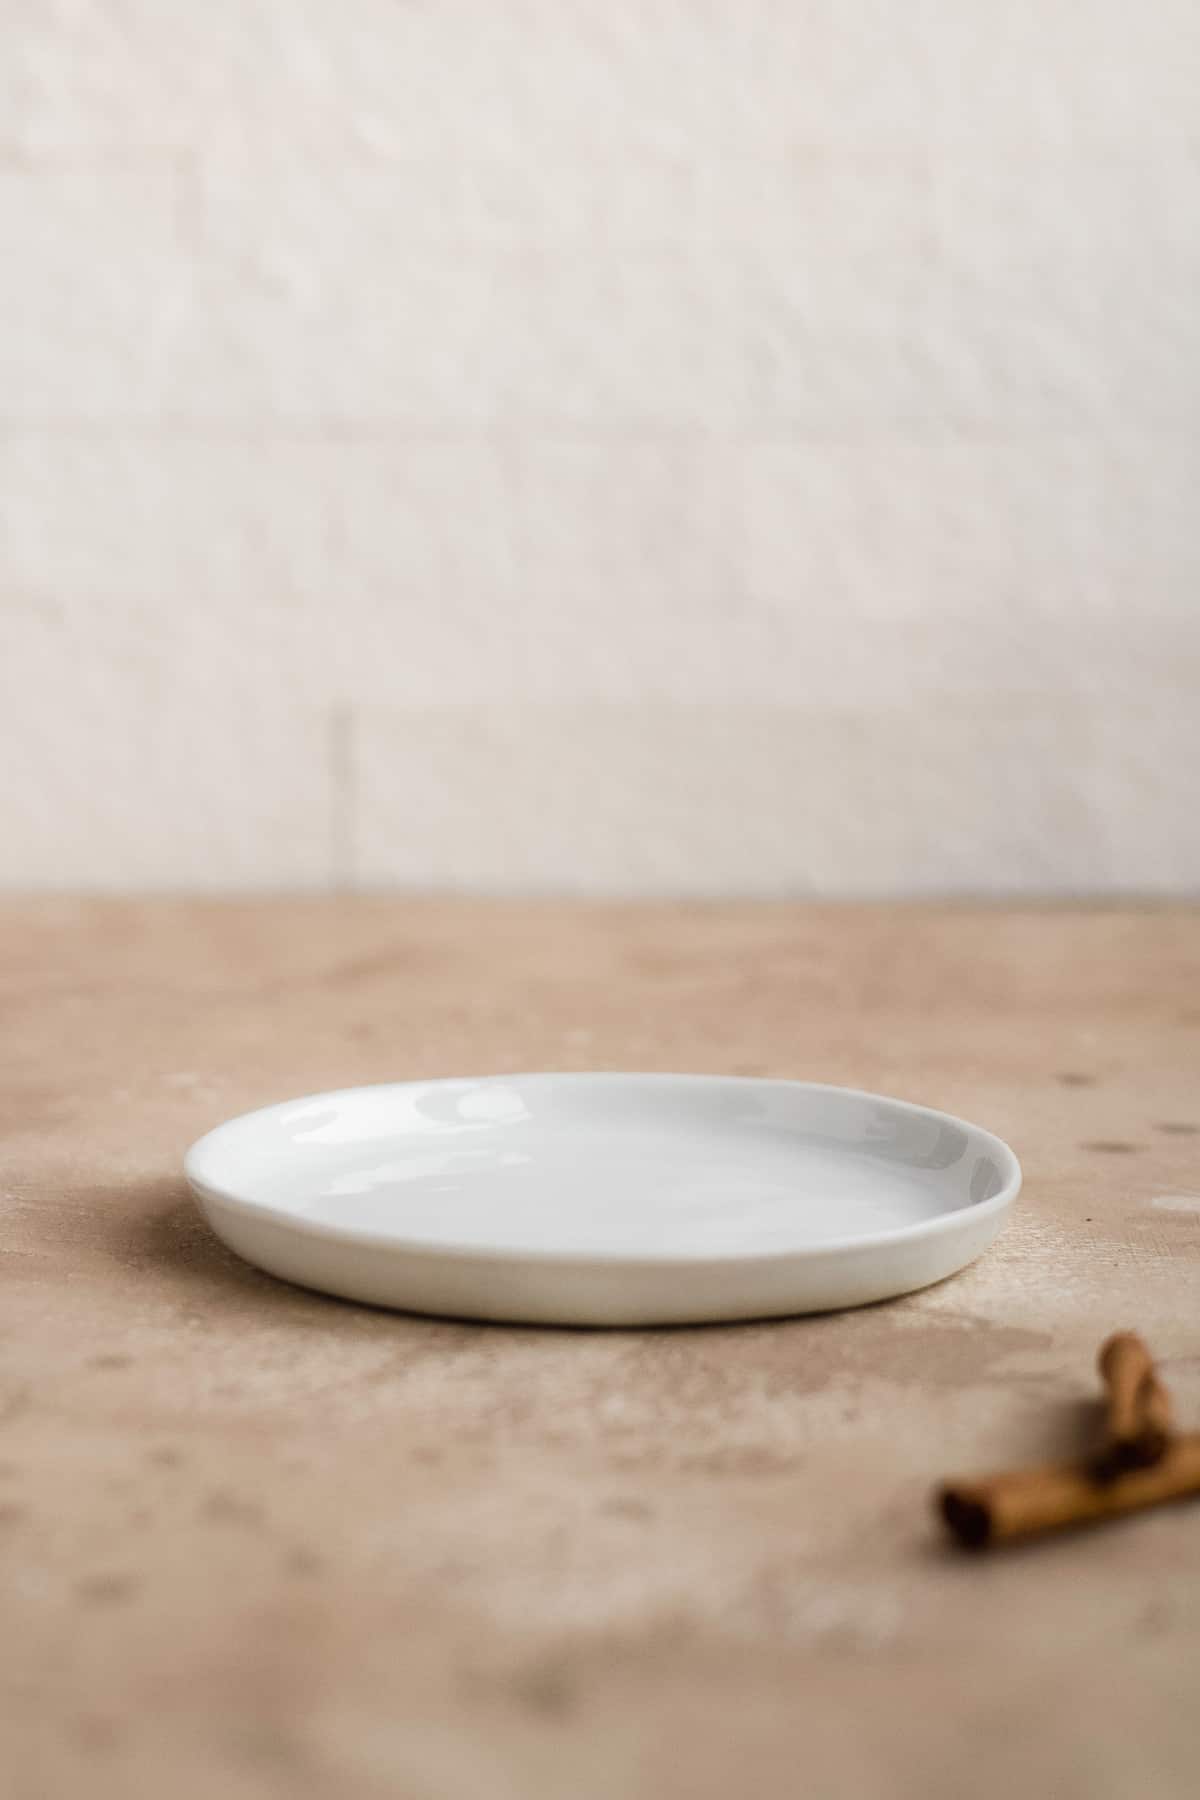 White plate on a brown surface.